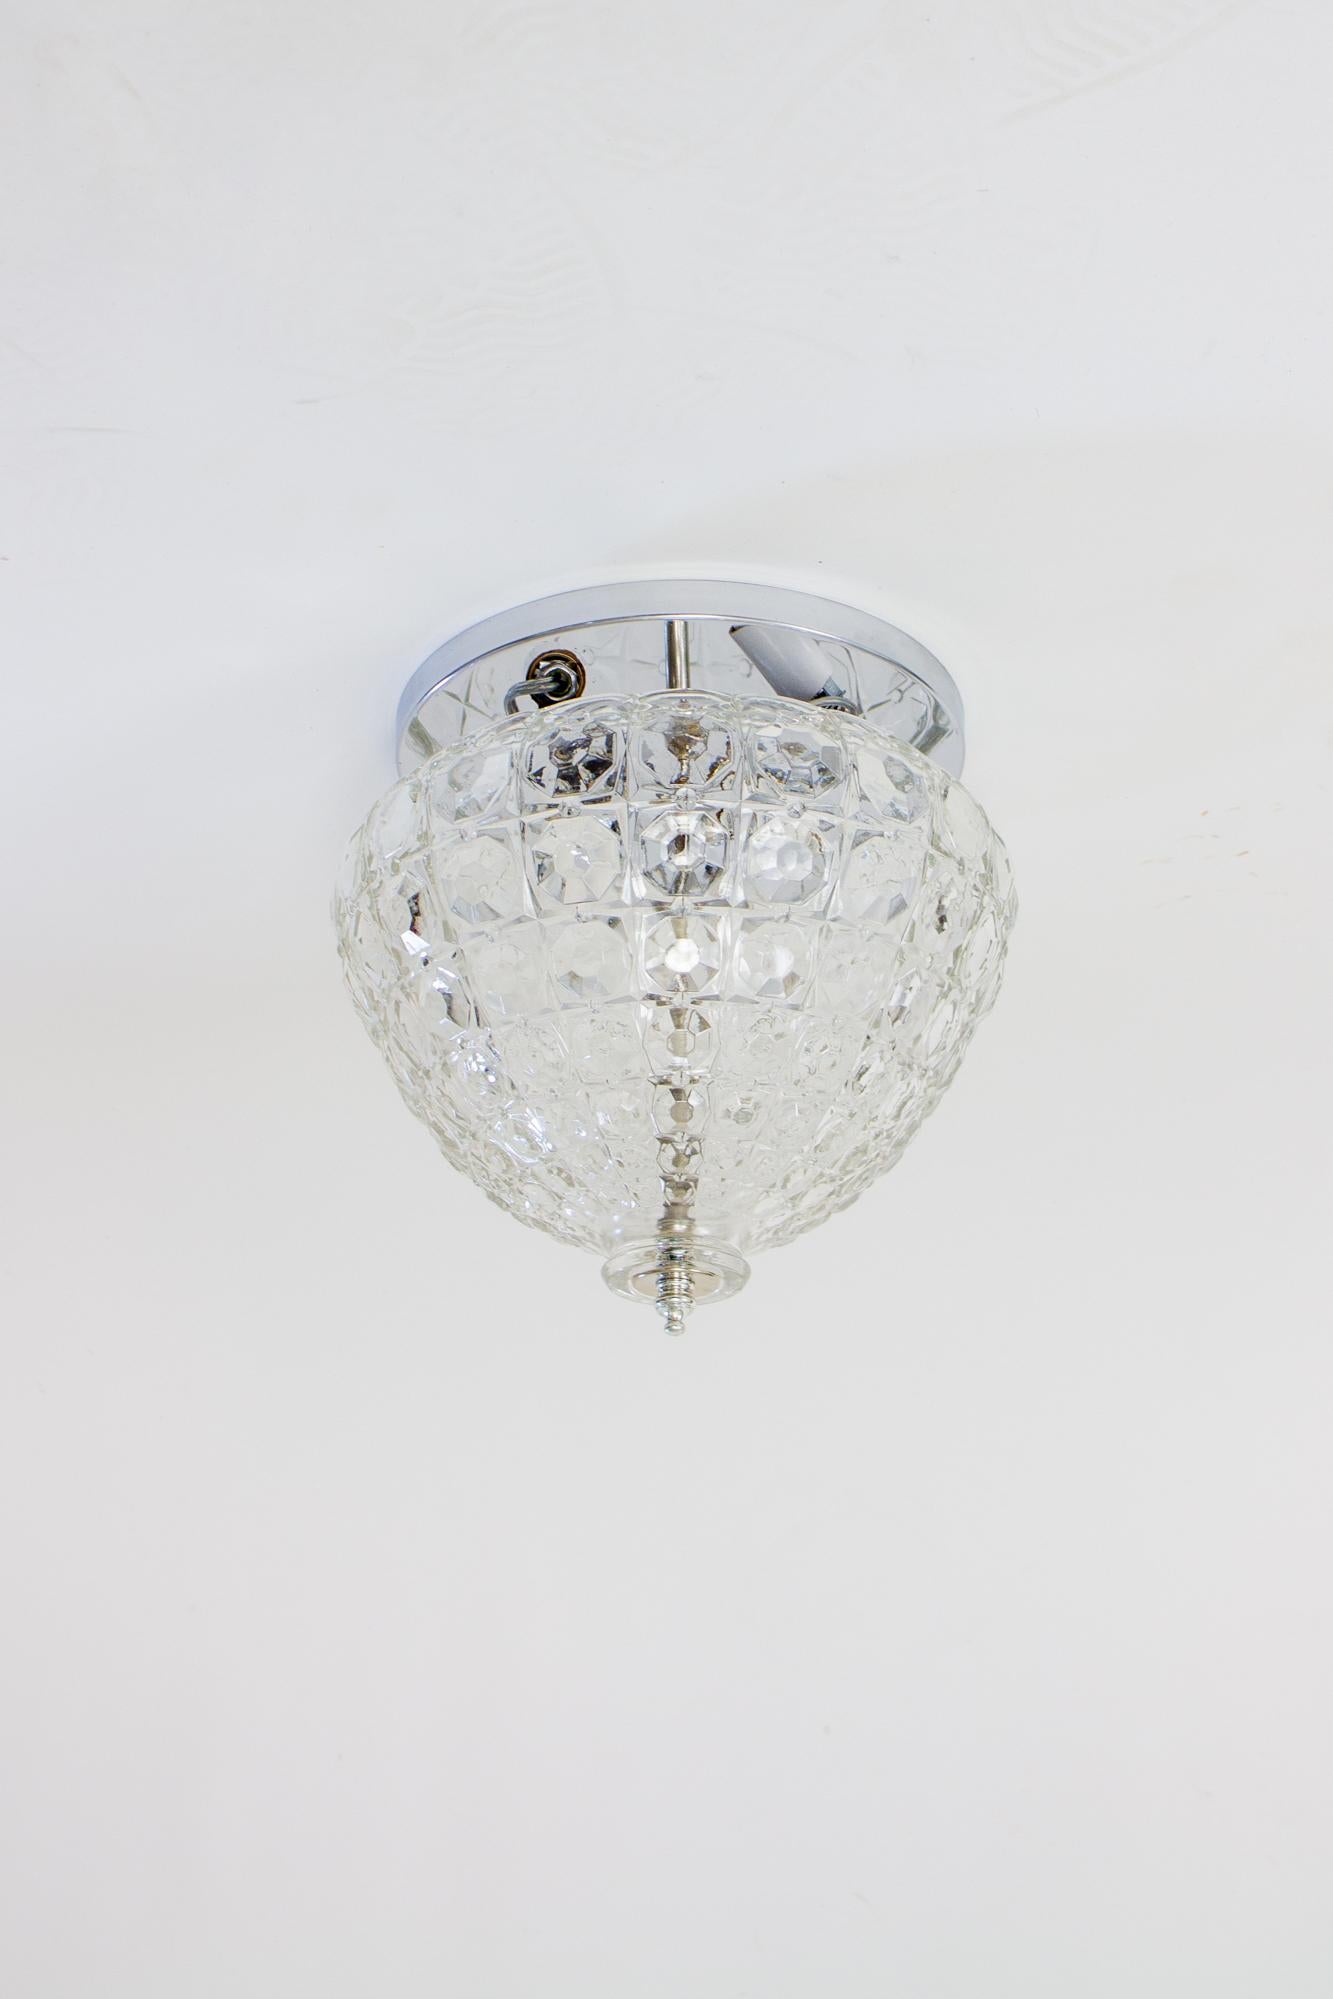 Hollywood Regency P326 Mid-20th Century Crystalline Glass Flush Mount Fixture For Sale